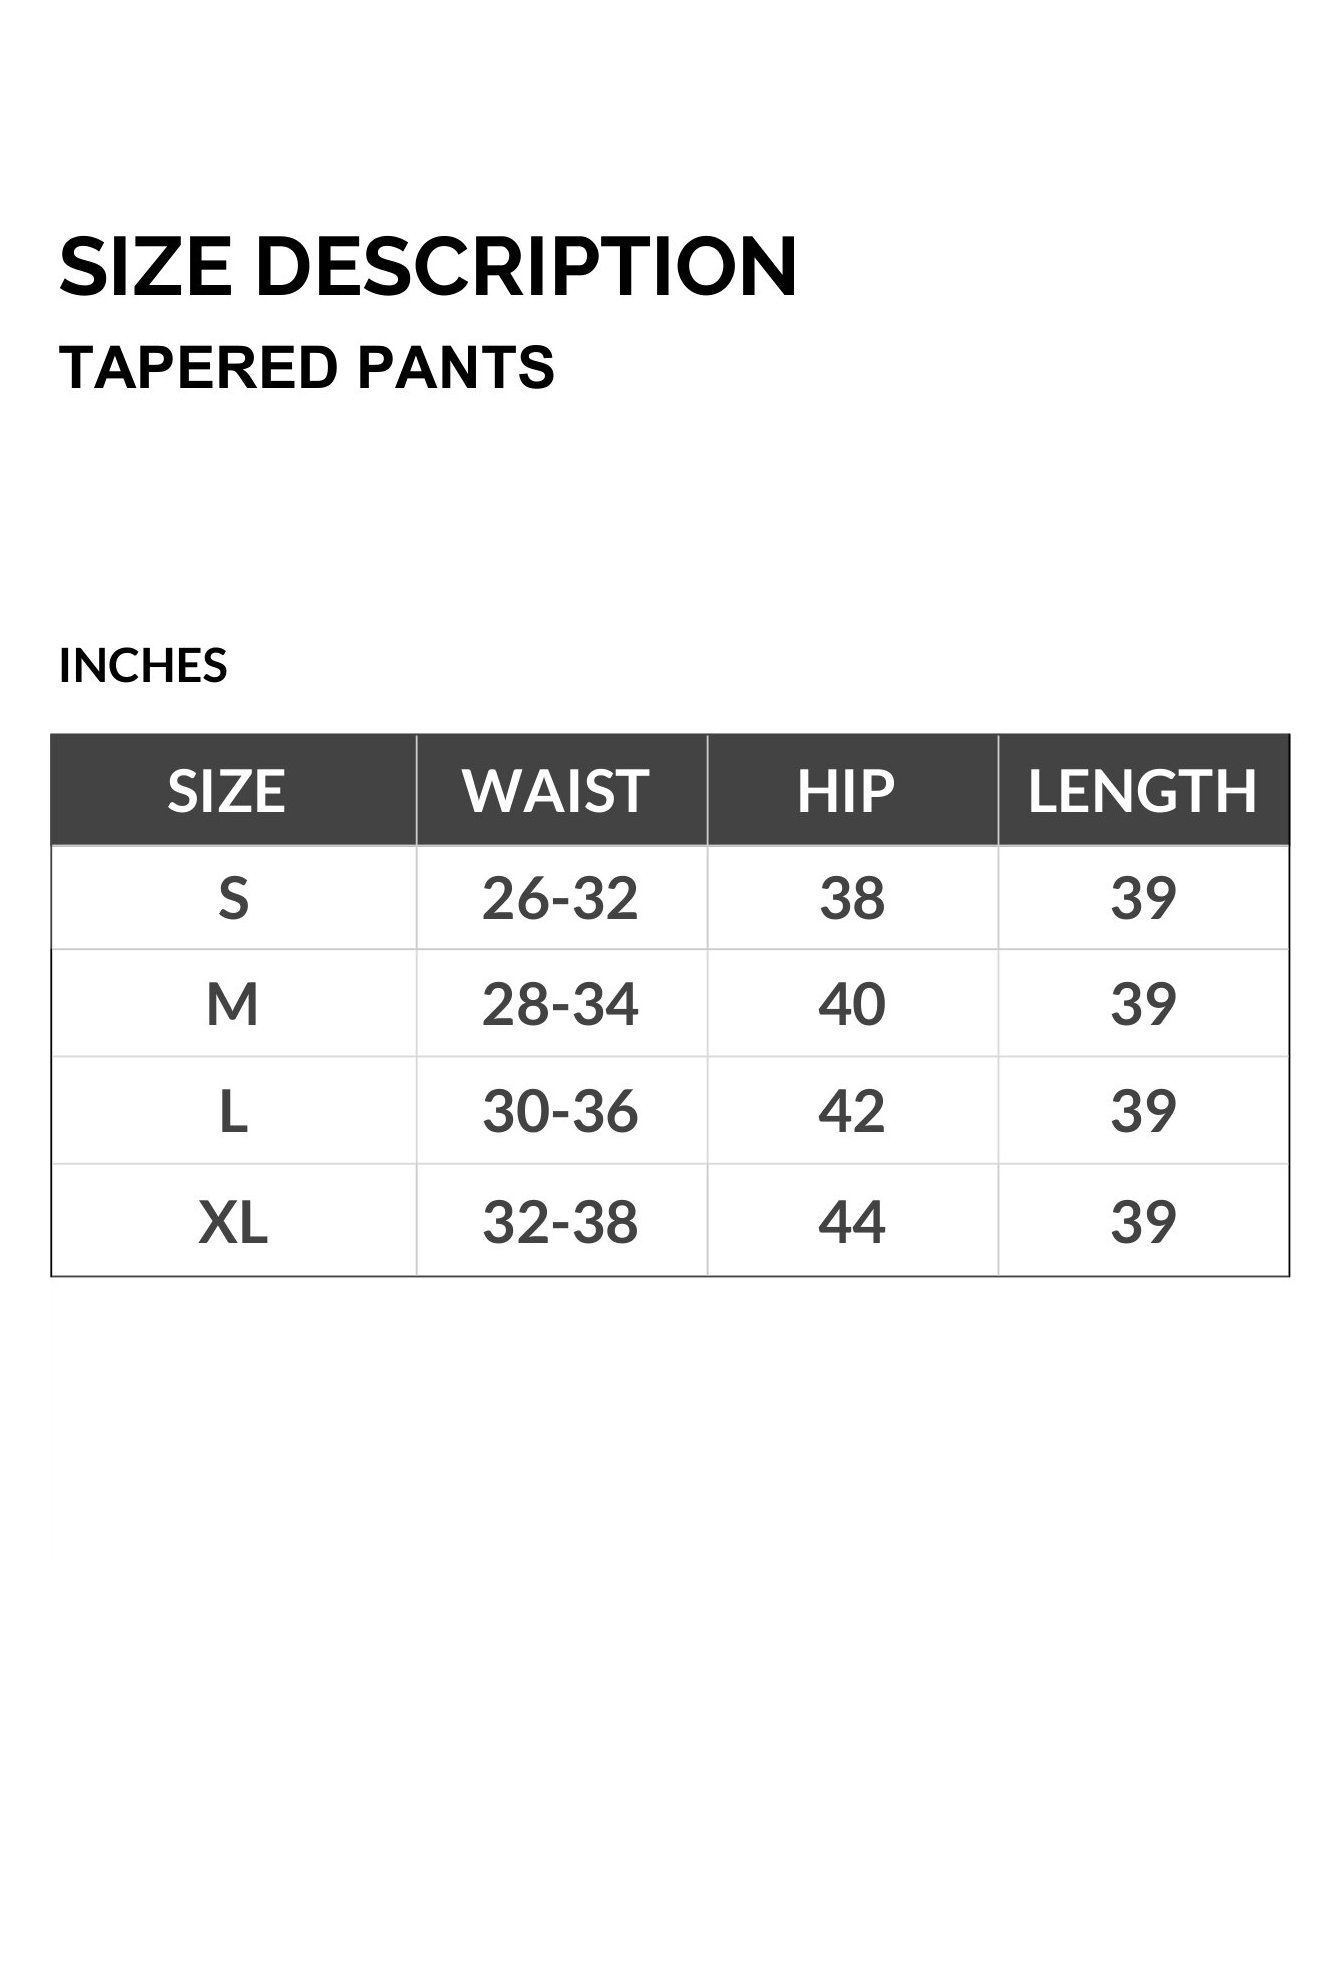 SIZES TAPERED PANTS